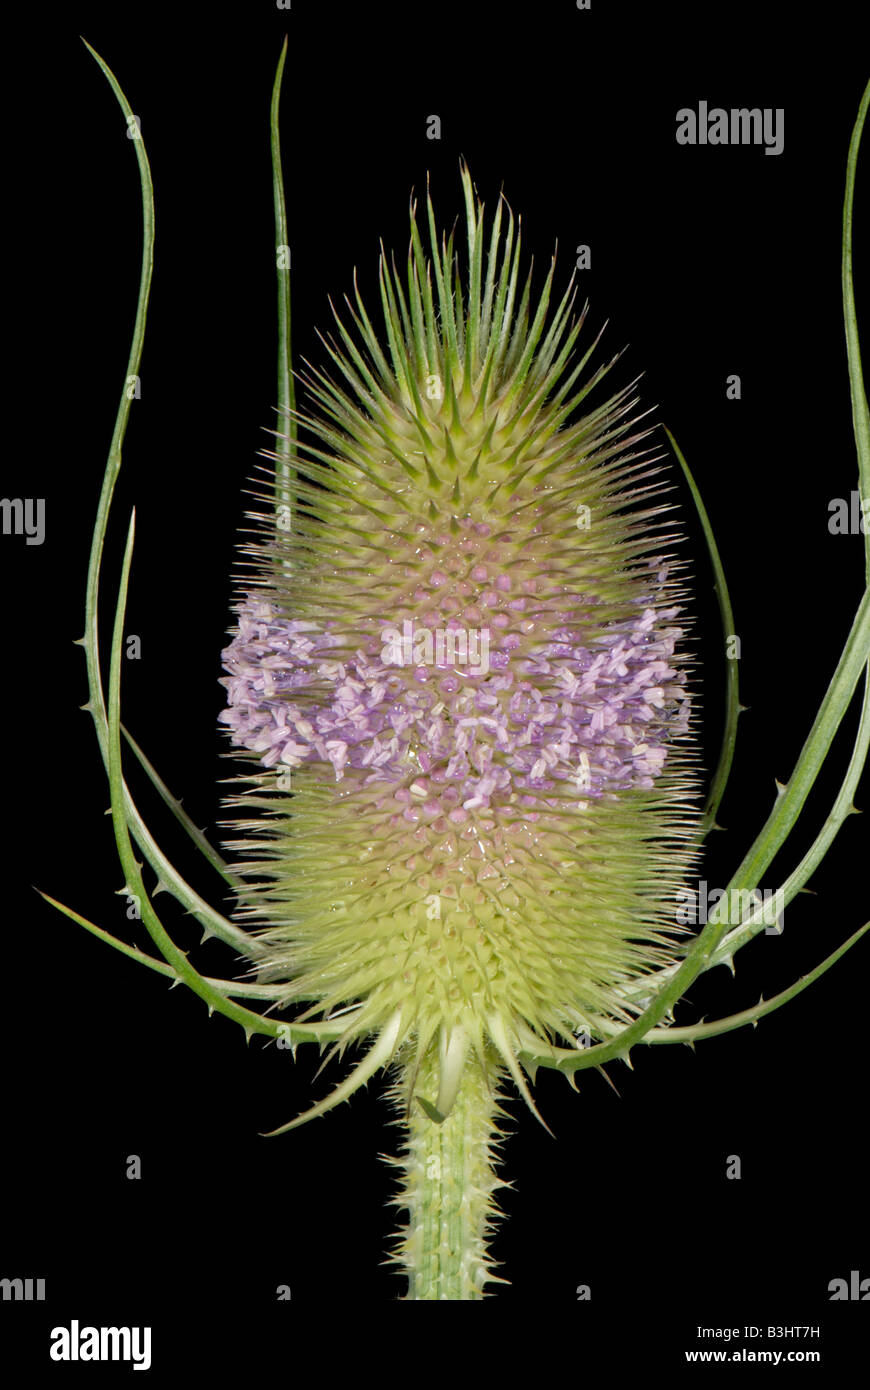 Teasel Dipsacus fullonum with a single whorl of open flowers on spiny flowerhead Stock Photo